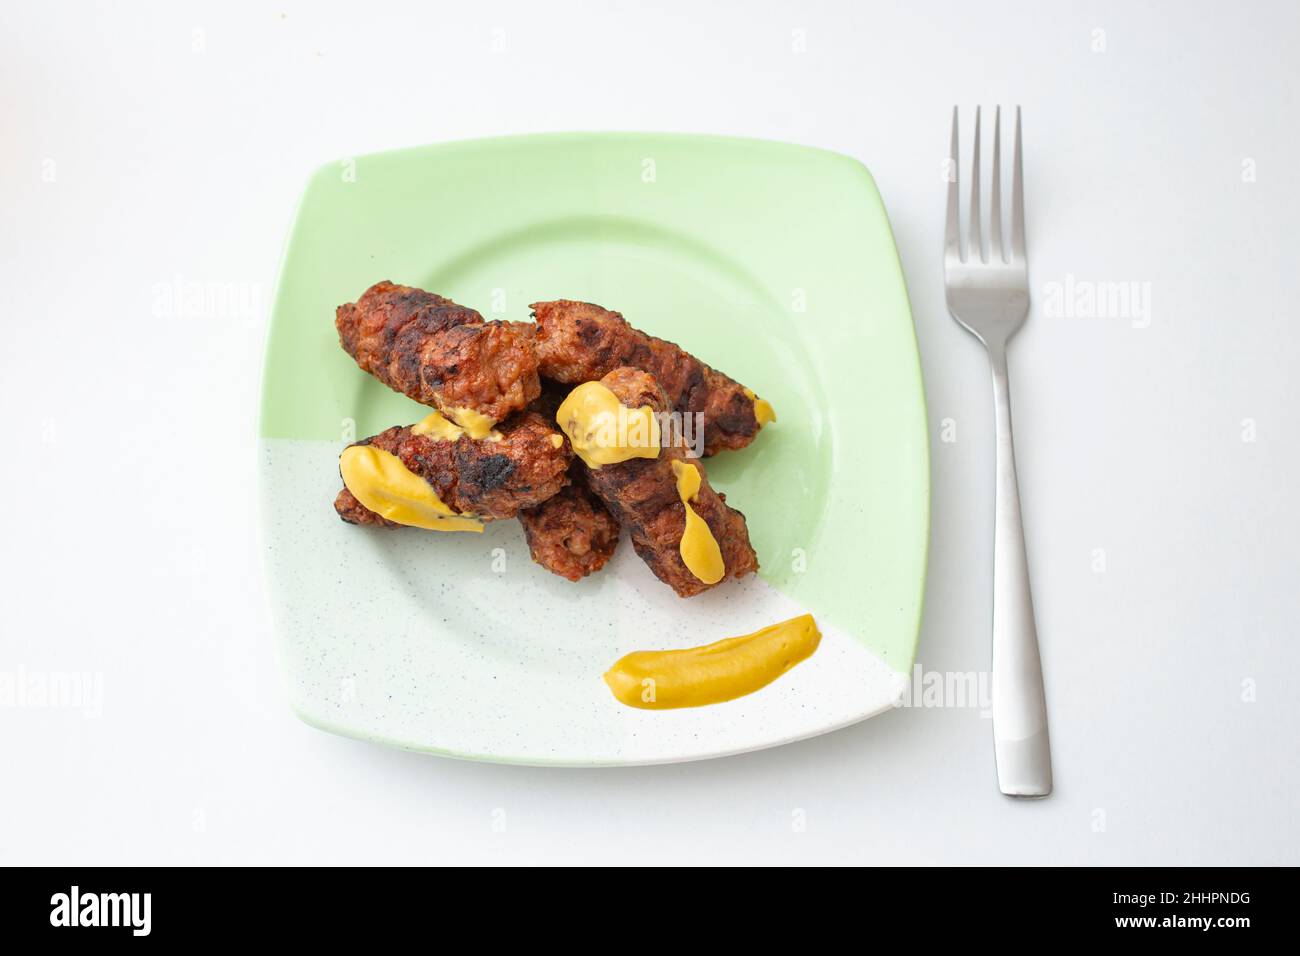 Mici or mitititei (traditional romanian food) with mustard on a ceramic plate, on white background. Hand holding a stainless steel fork Stock Photo